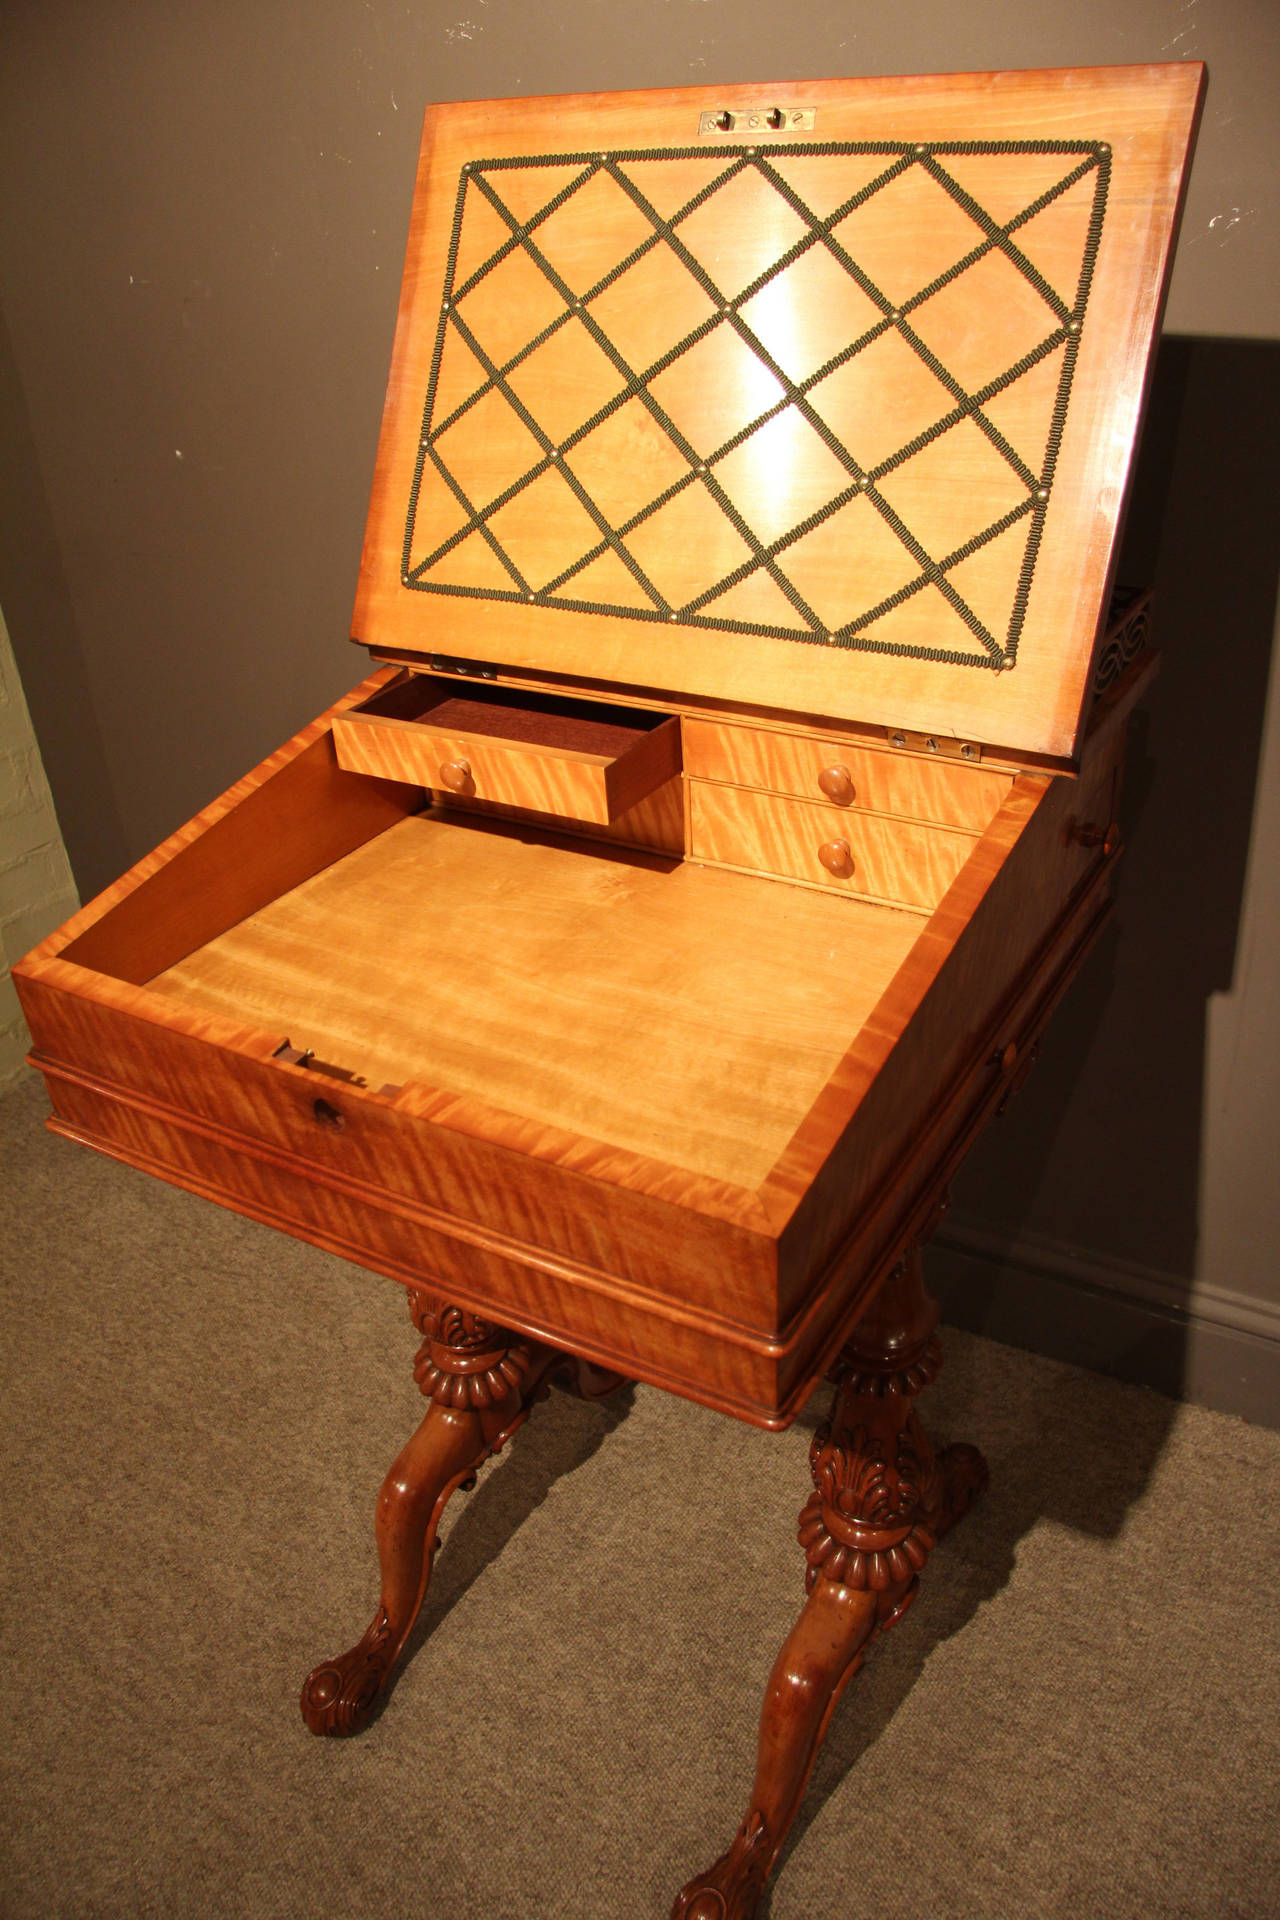 A fine late Regency period satinwood writing/davenport. This piece is highly figured with a secret drawer and side slide on well carved legs. This has a superb original pierce gallery and is highly recommended, circa 1825. 

Shown with a mini